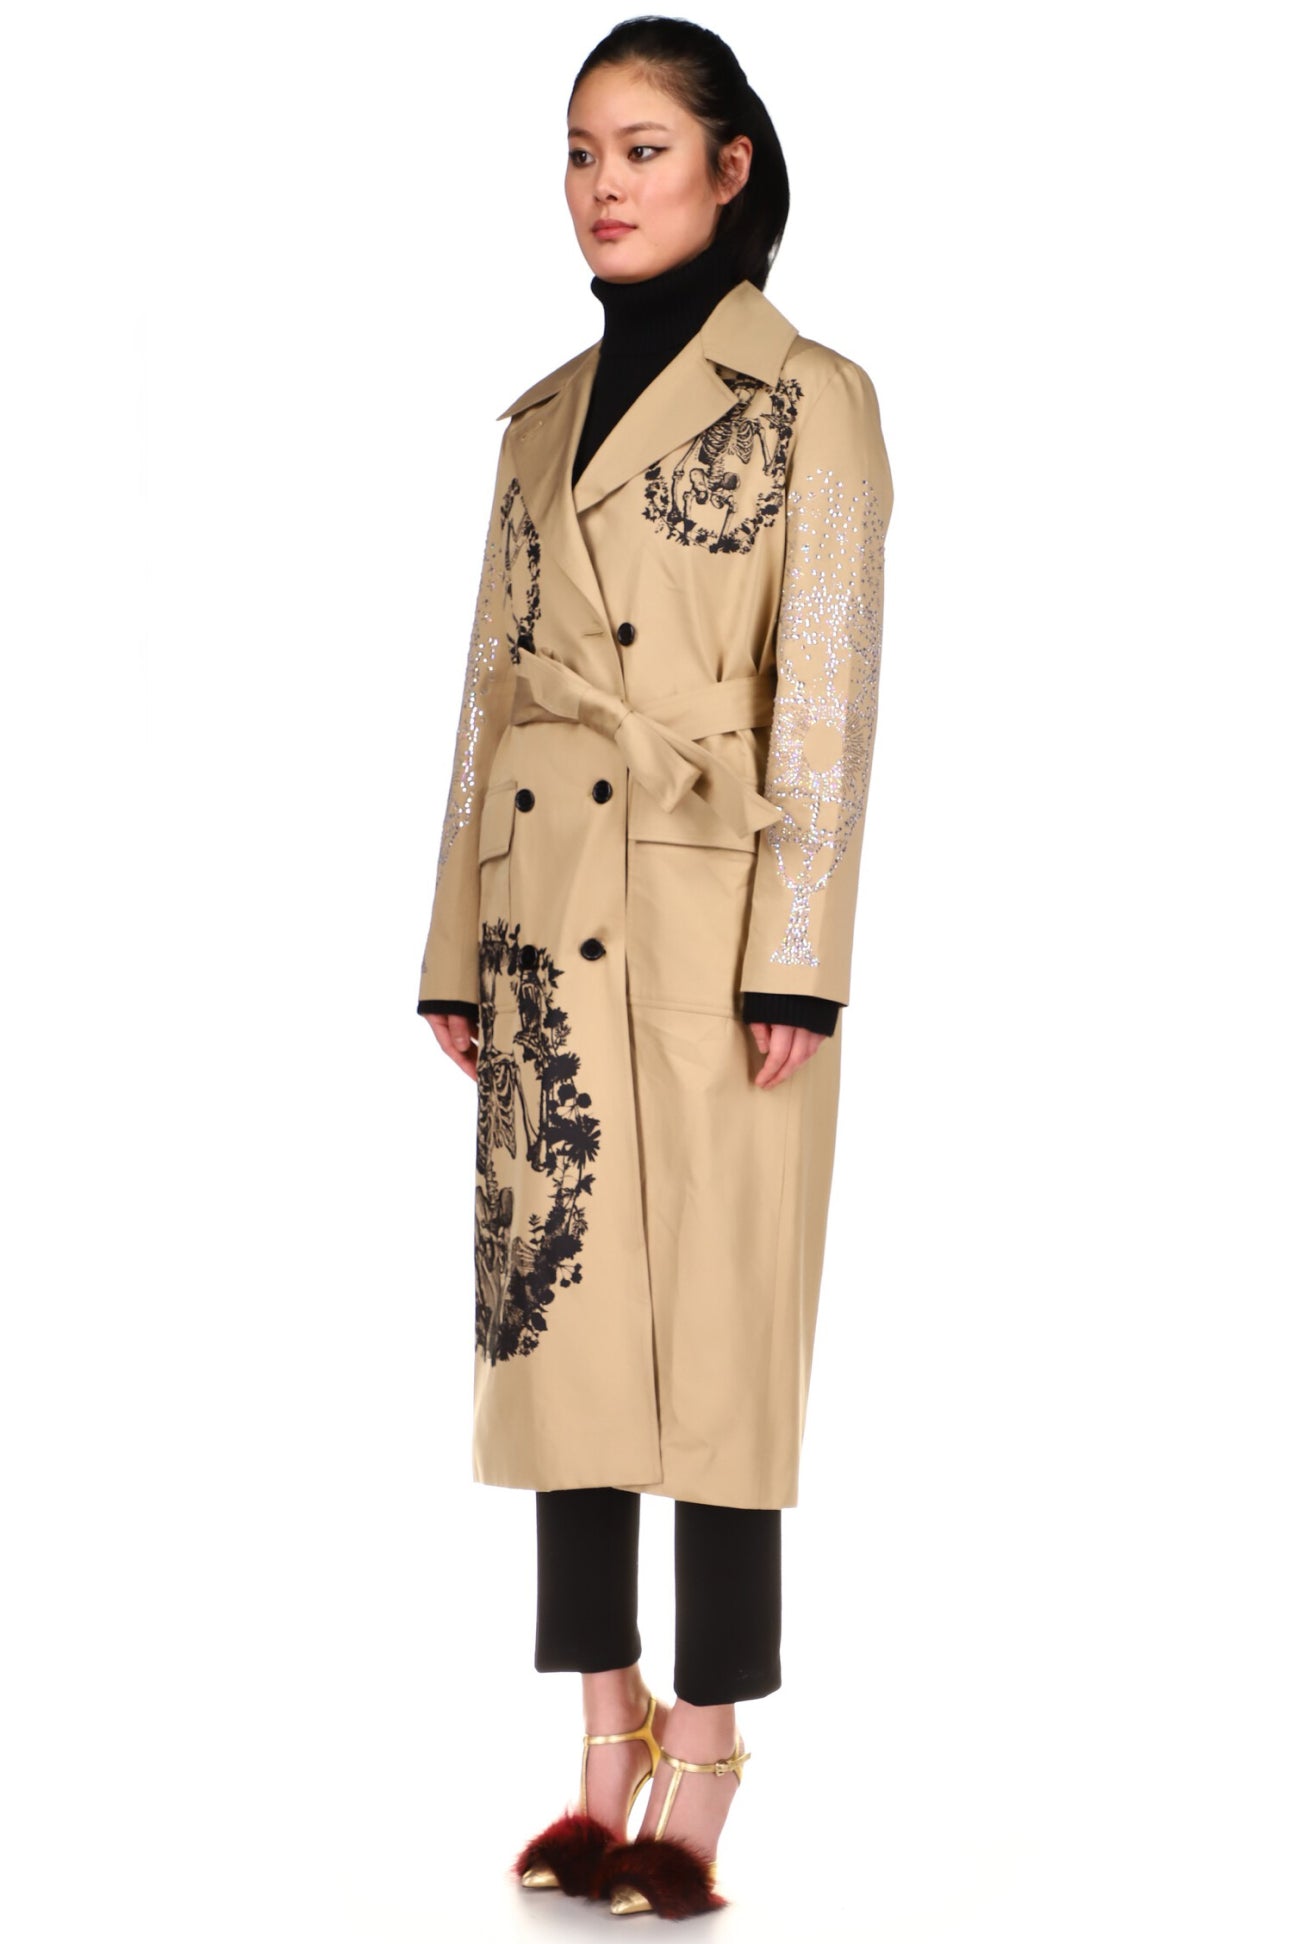 SILK SCREENED 'TOMBES' LONG LEAN TRENCH IN KHAKI WITH CRYSTAL SLEEVES - COATS - Libertine